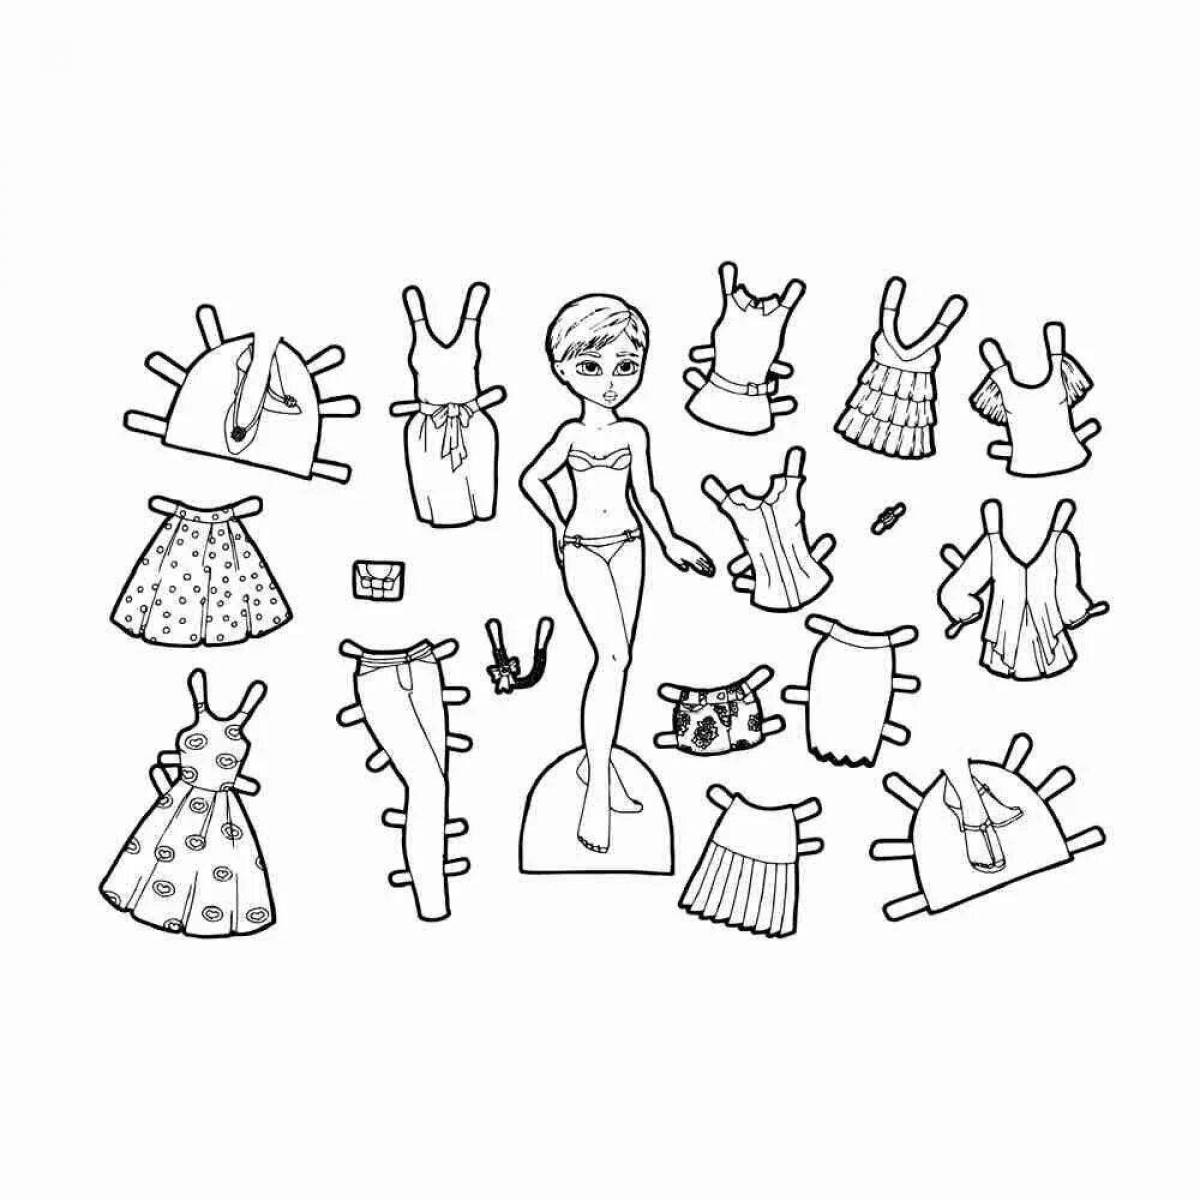 Jovial coloring page black and white lol doll with clothes